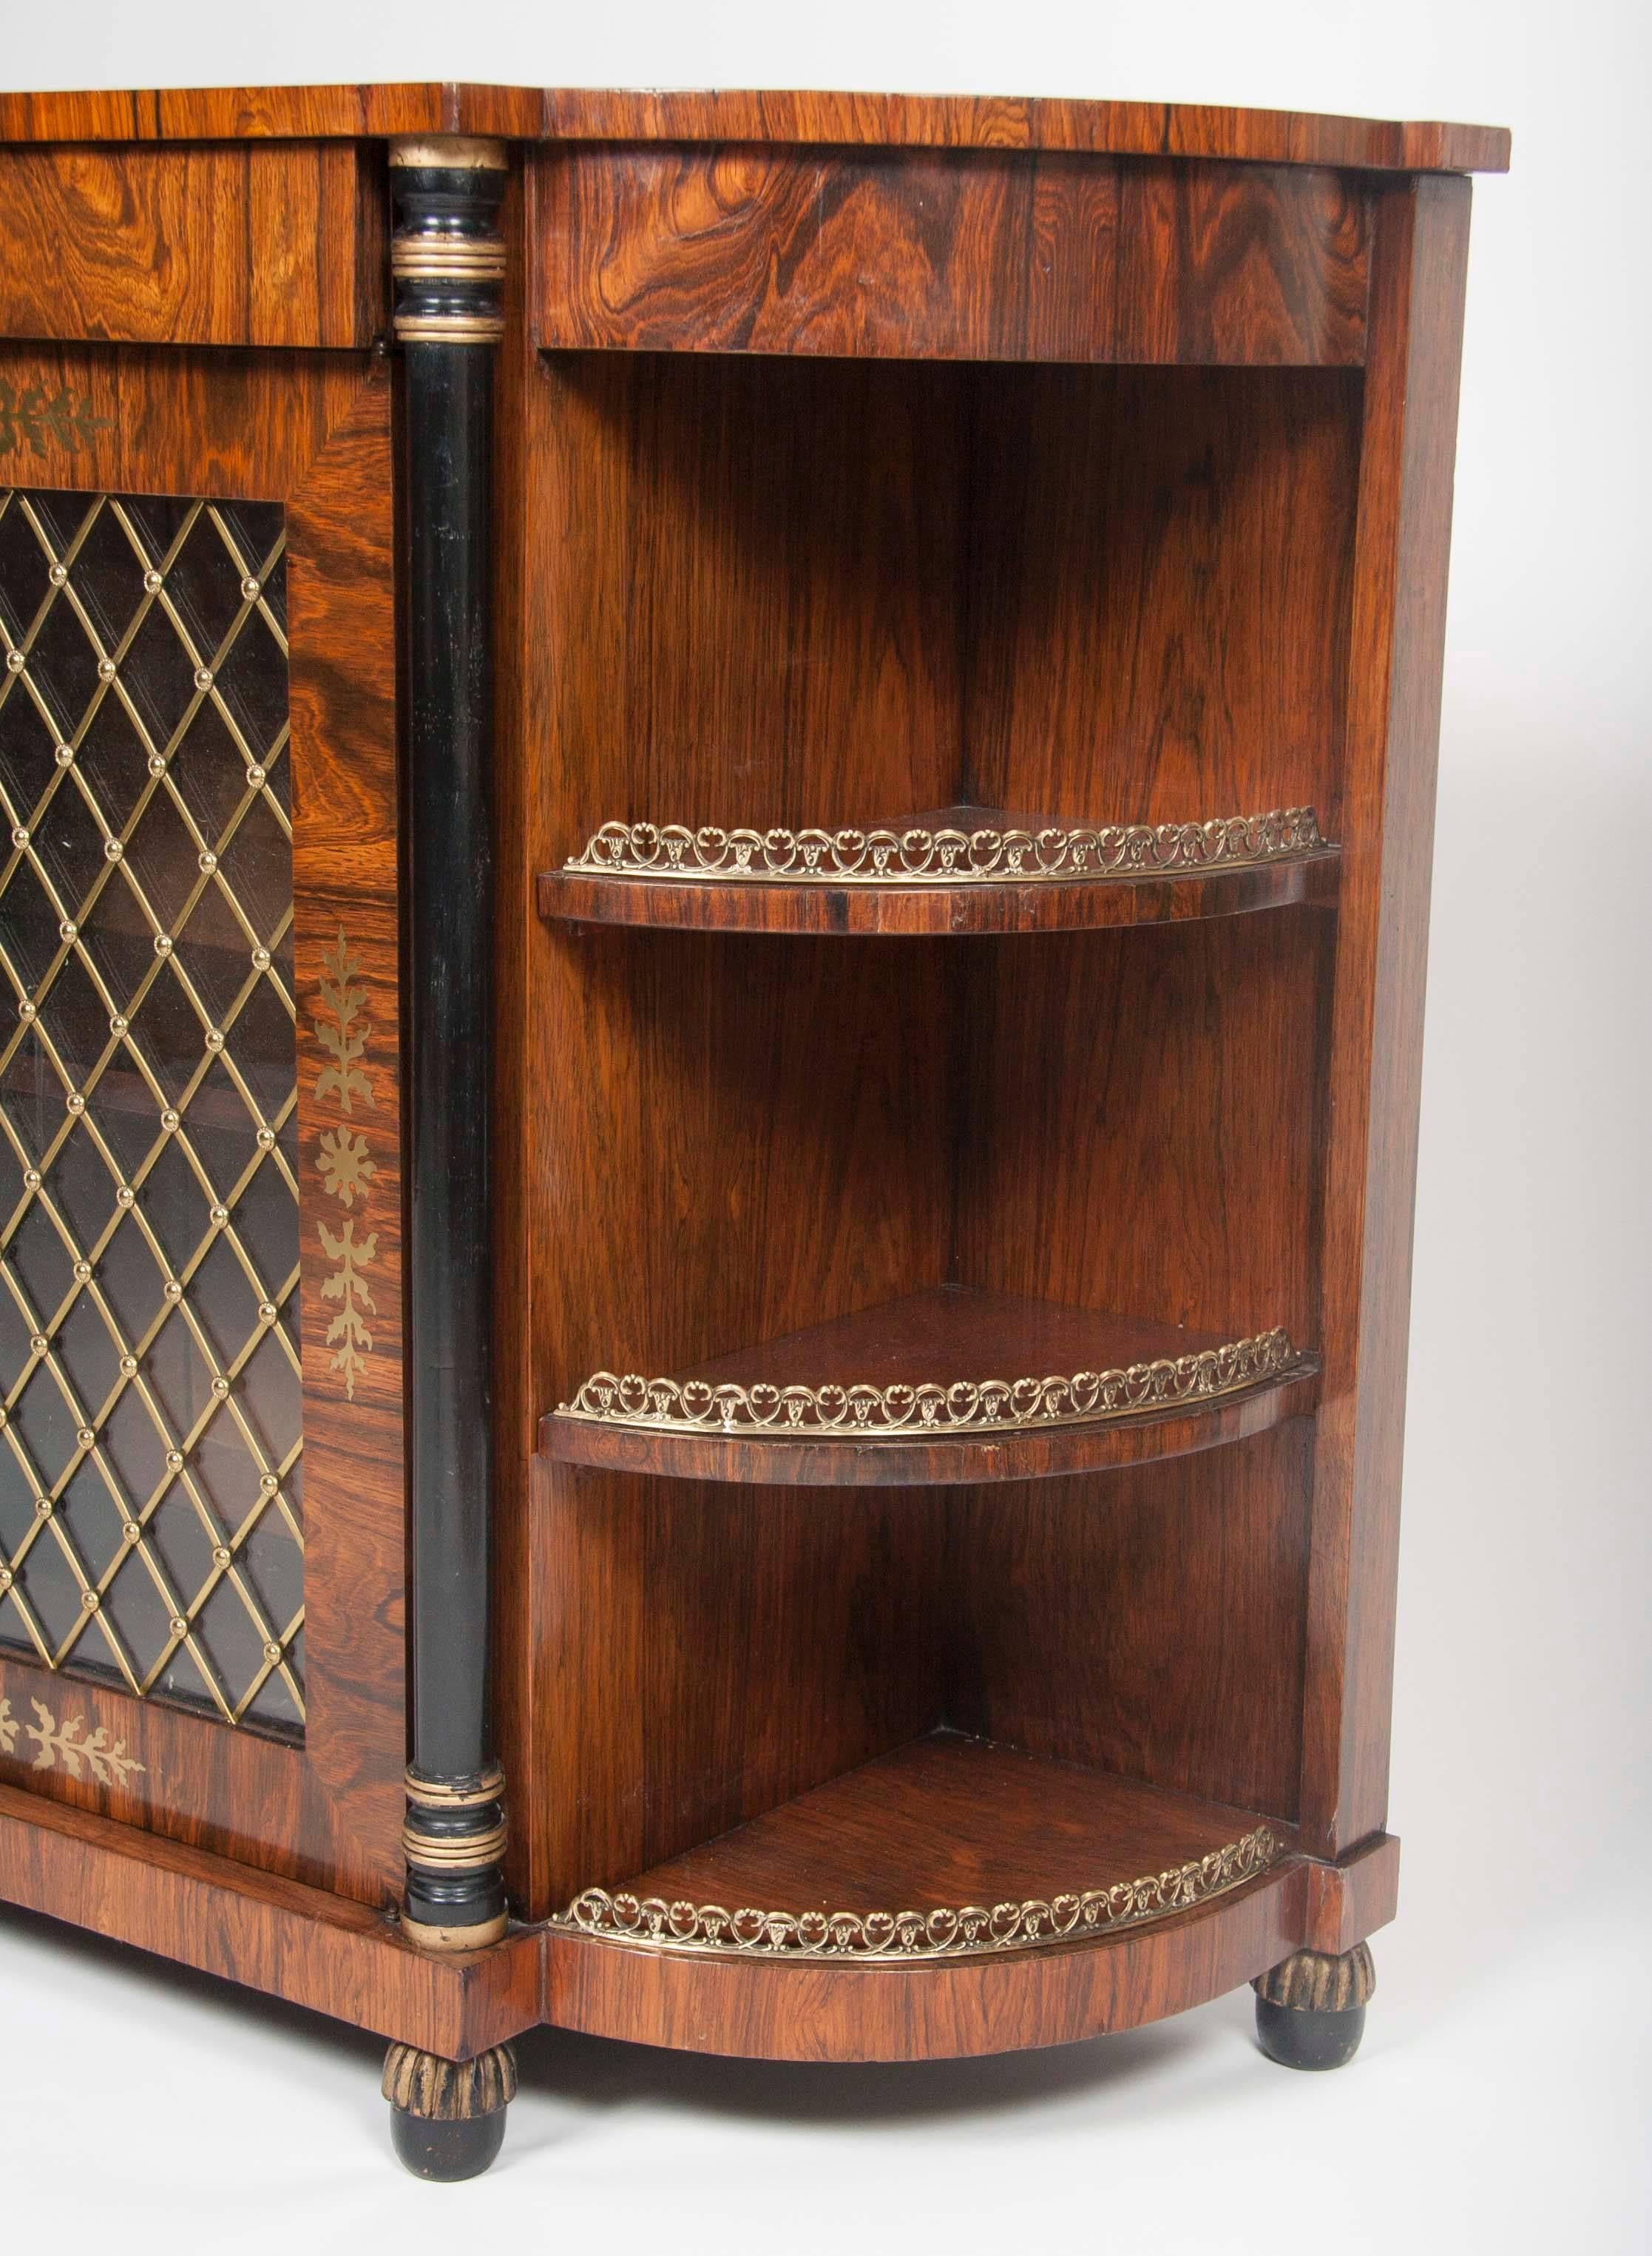 English Regency Rosewood Credenza with Brass Inlay